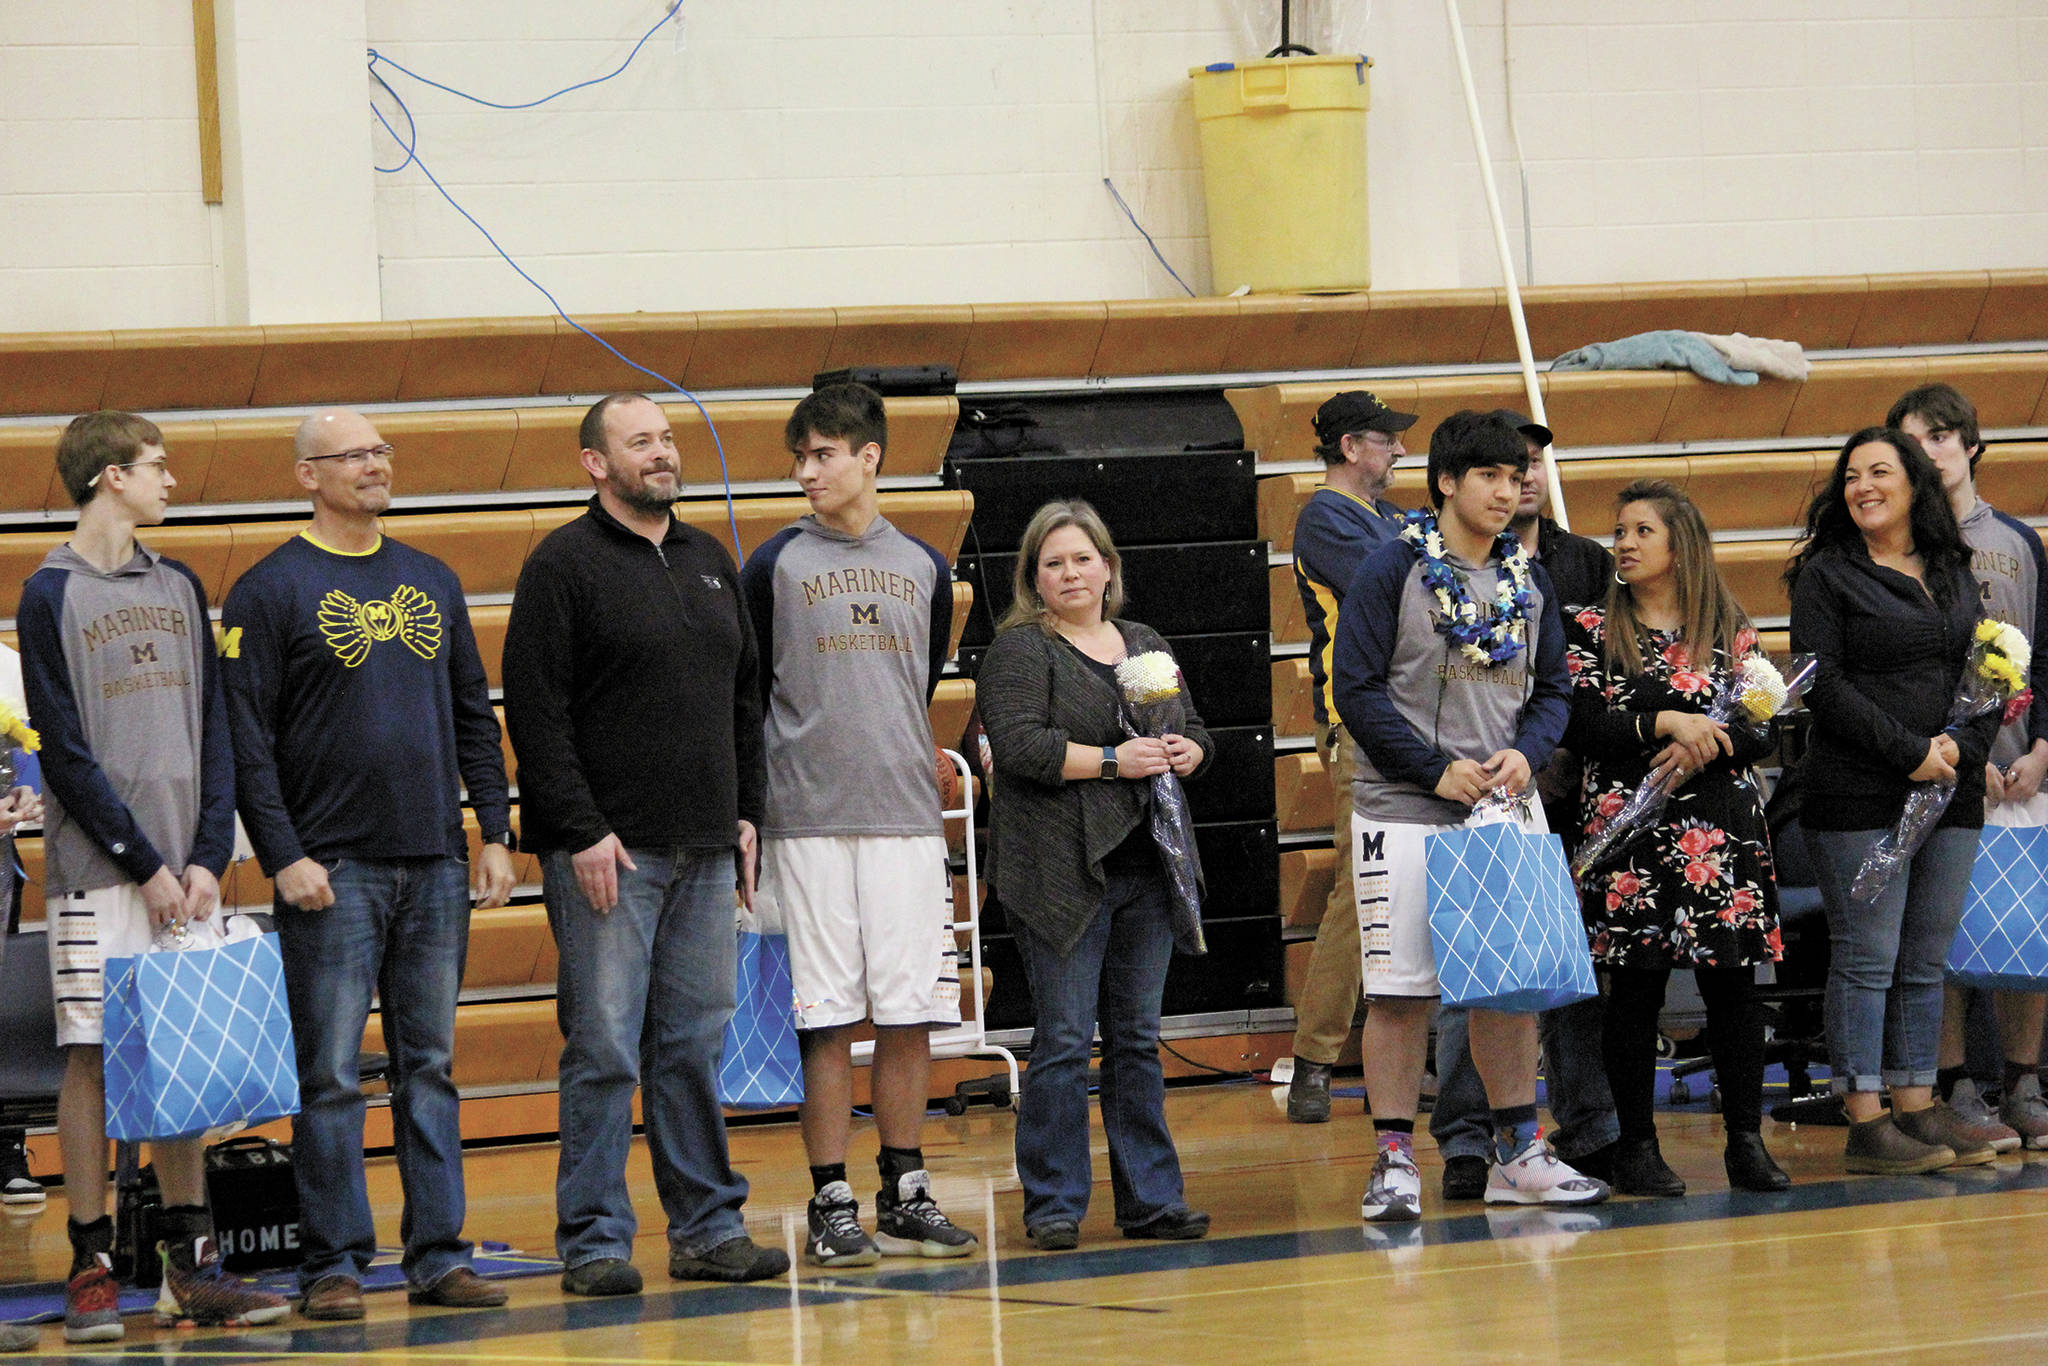 Senior members of the Homer boys varsity basketball team are honored on senior night before a Friday, Feb. 28, 2020 game against Nikiski in the Alice Witte Gymnasium in Homer, Alaska. (Photo by Megan Pacer/Homer News)